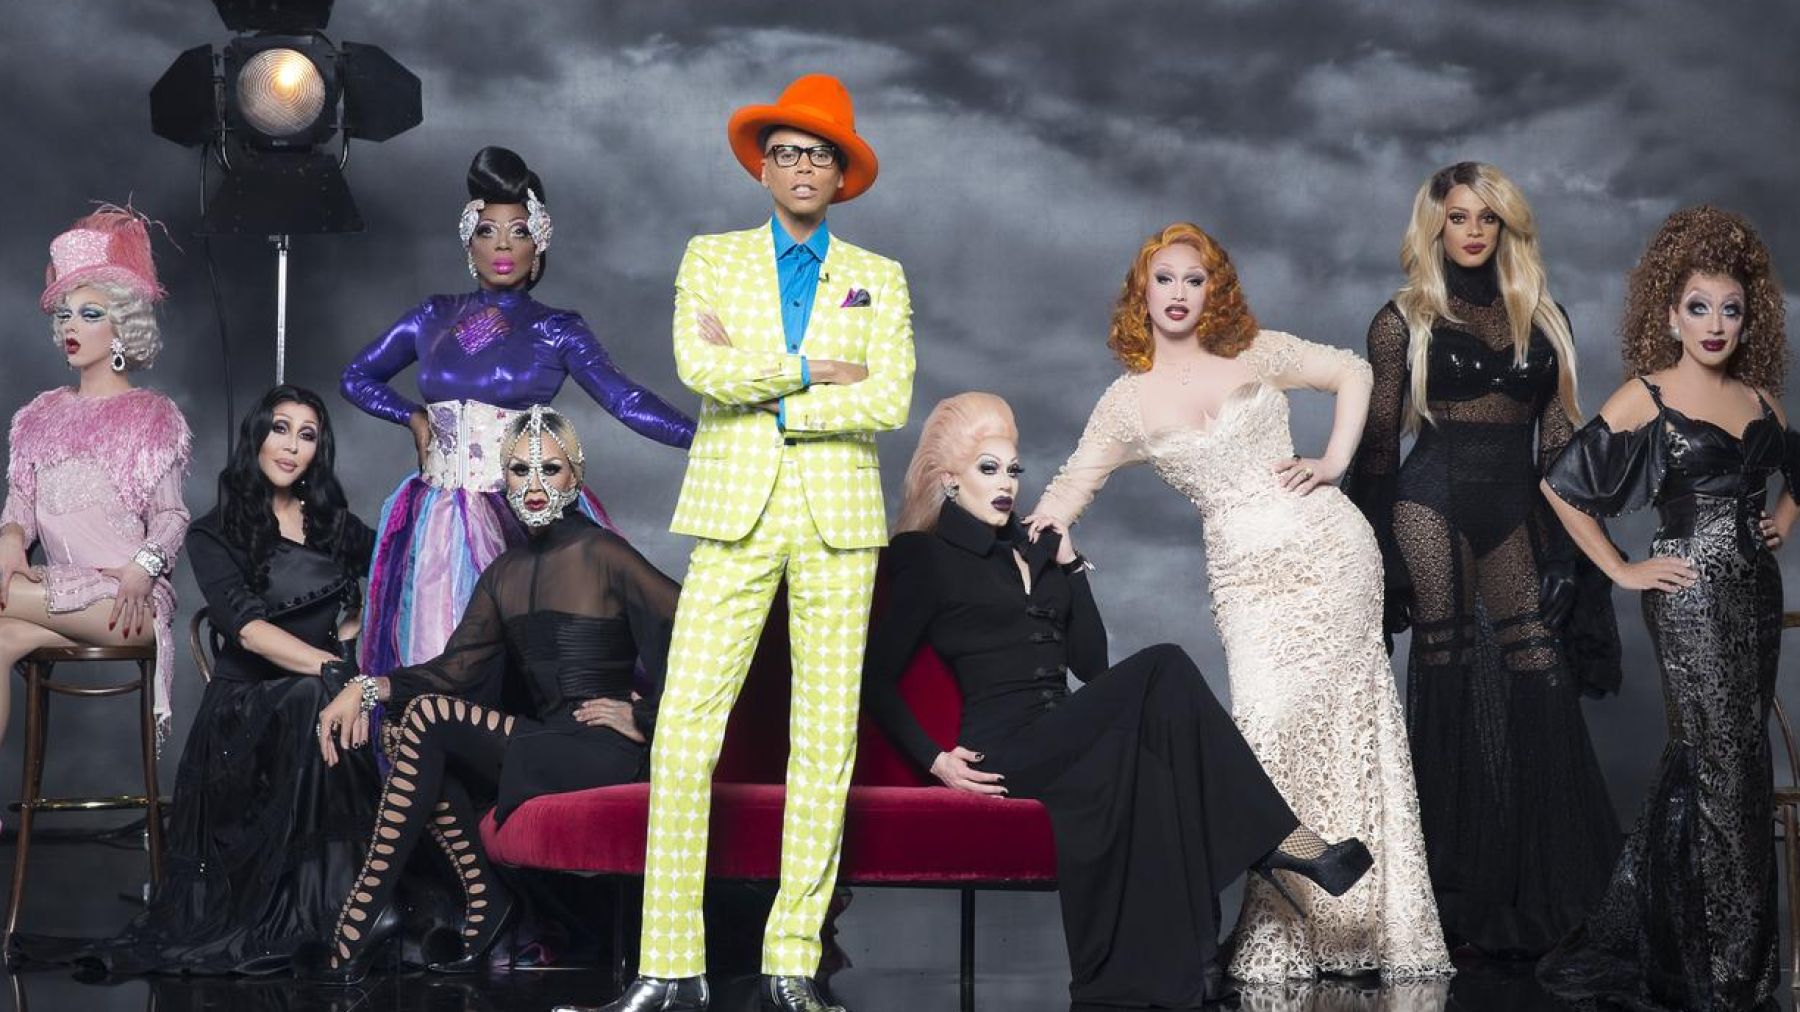 Rupaul Reunites With All The “drag Race” Winners - Rupaul Drag Race Winners - HD Wallpaper 